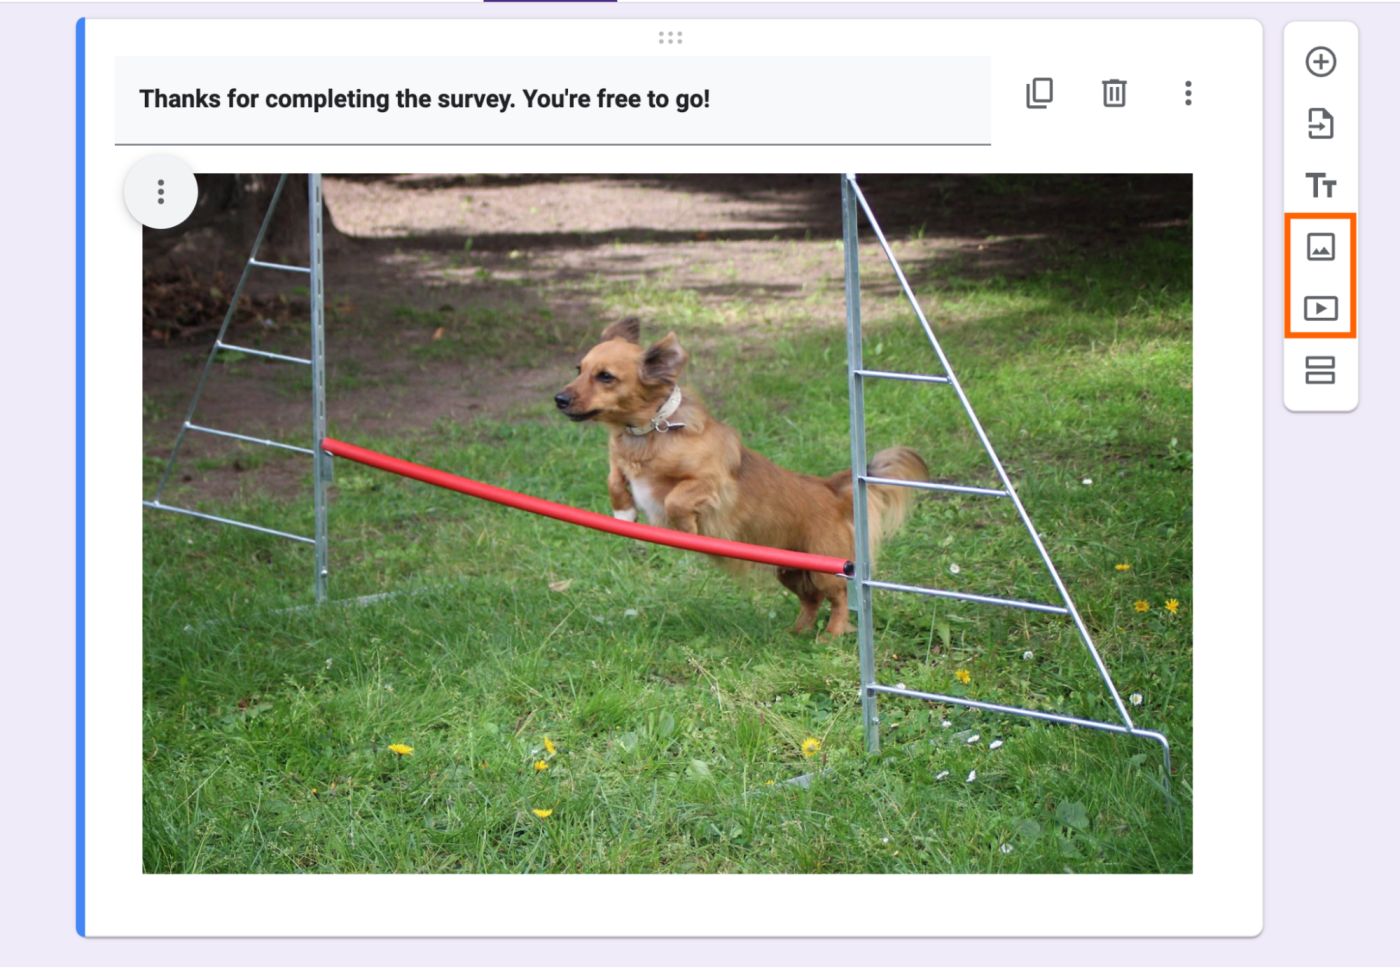 Example of a Google Forms field with only an image and text.